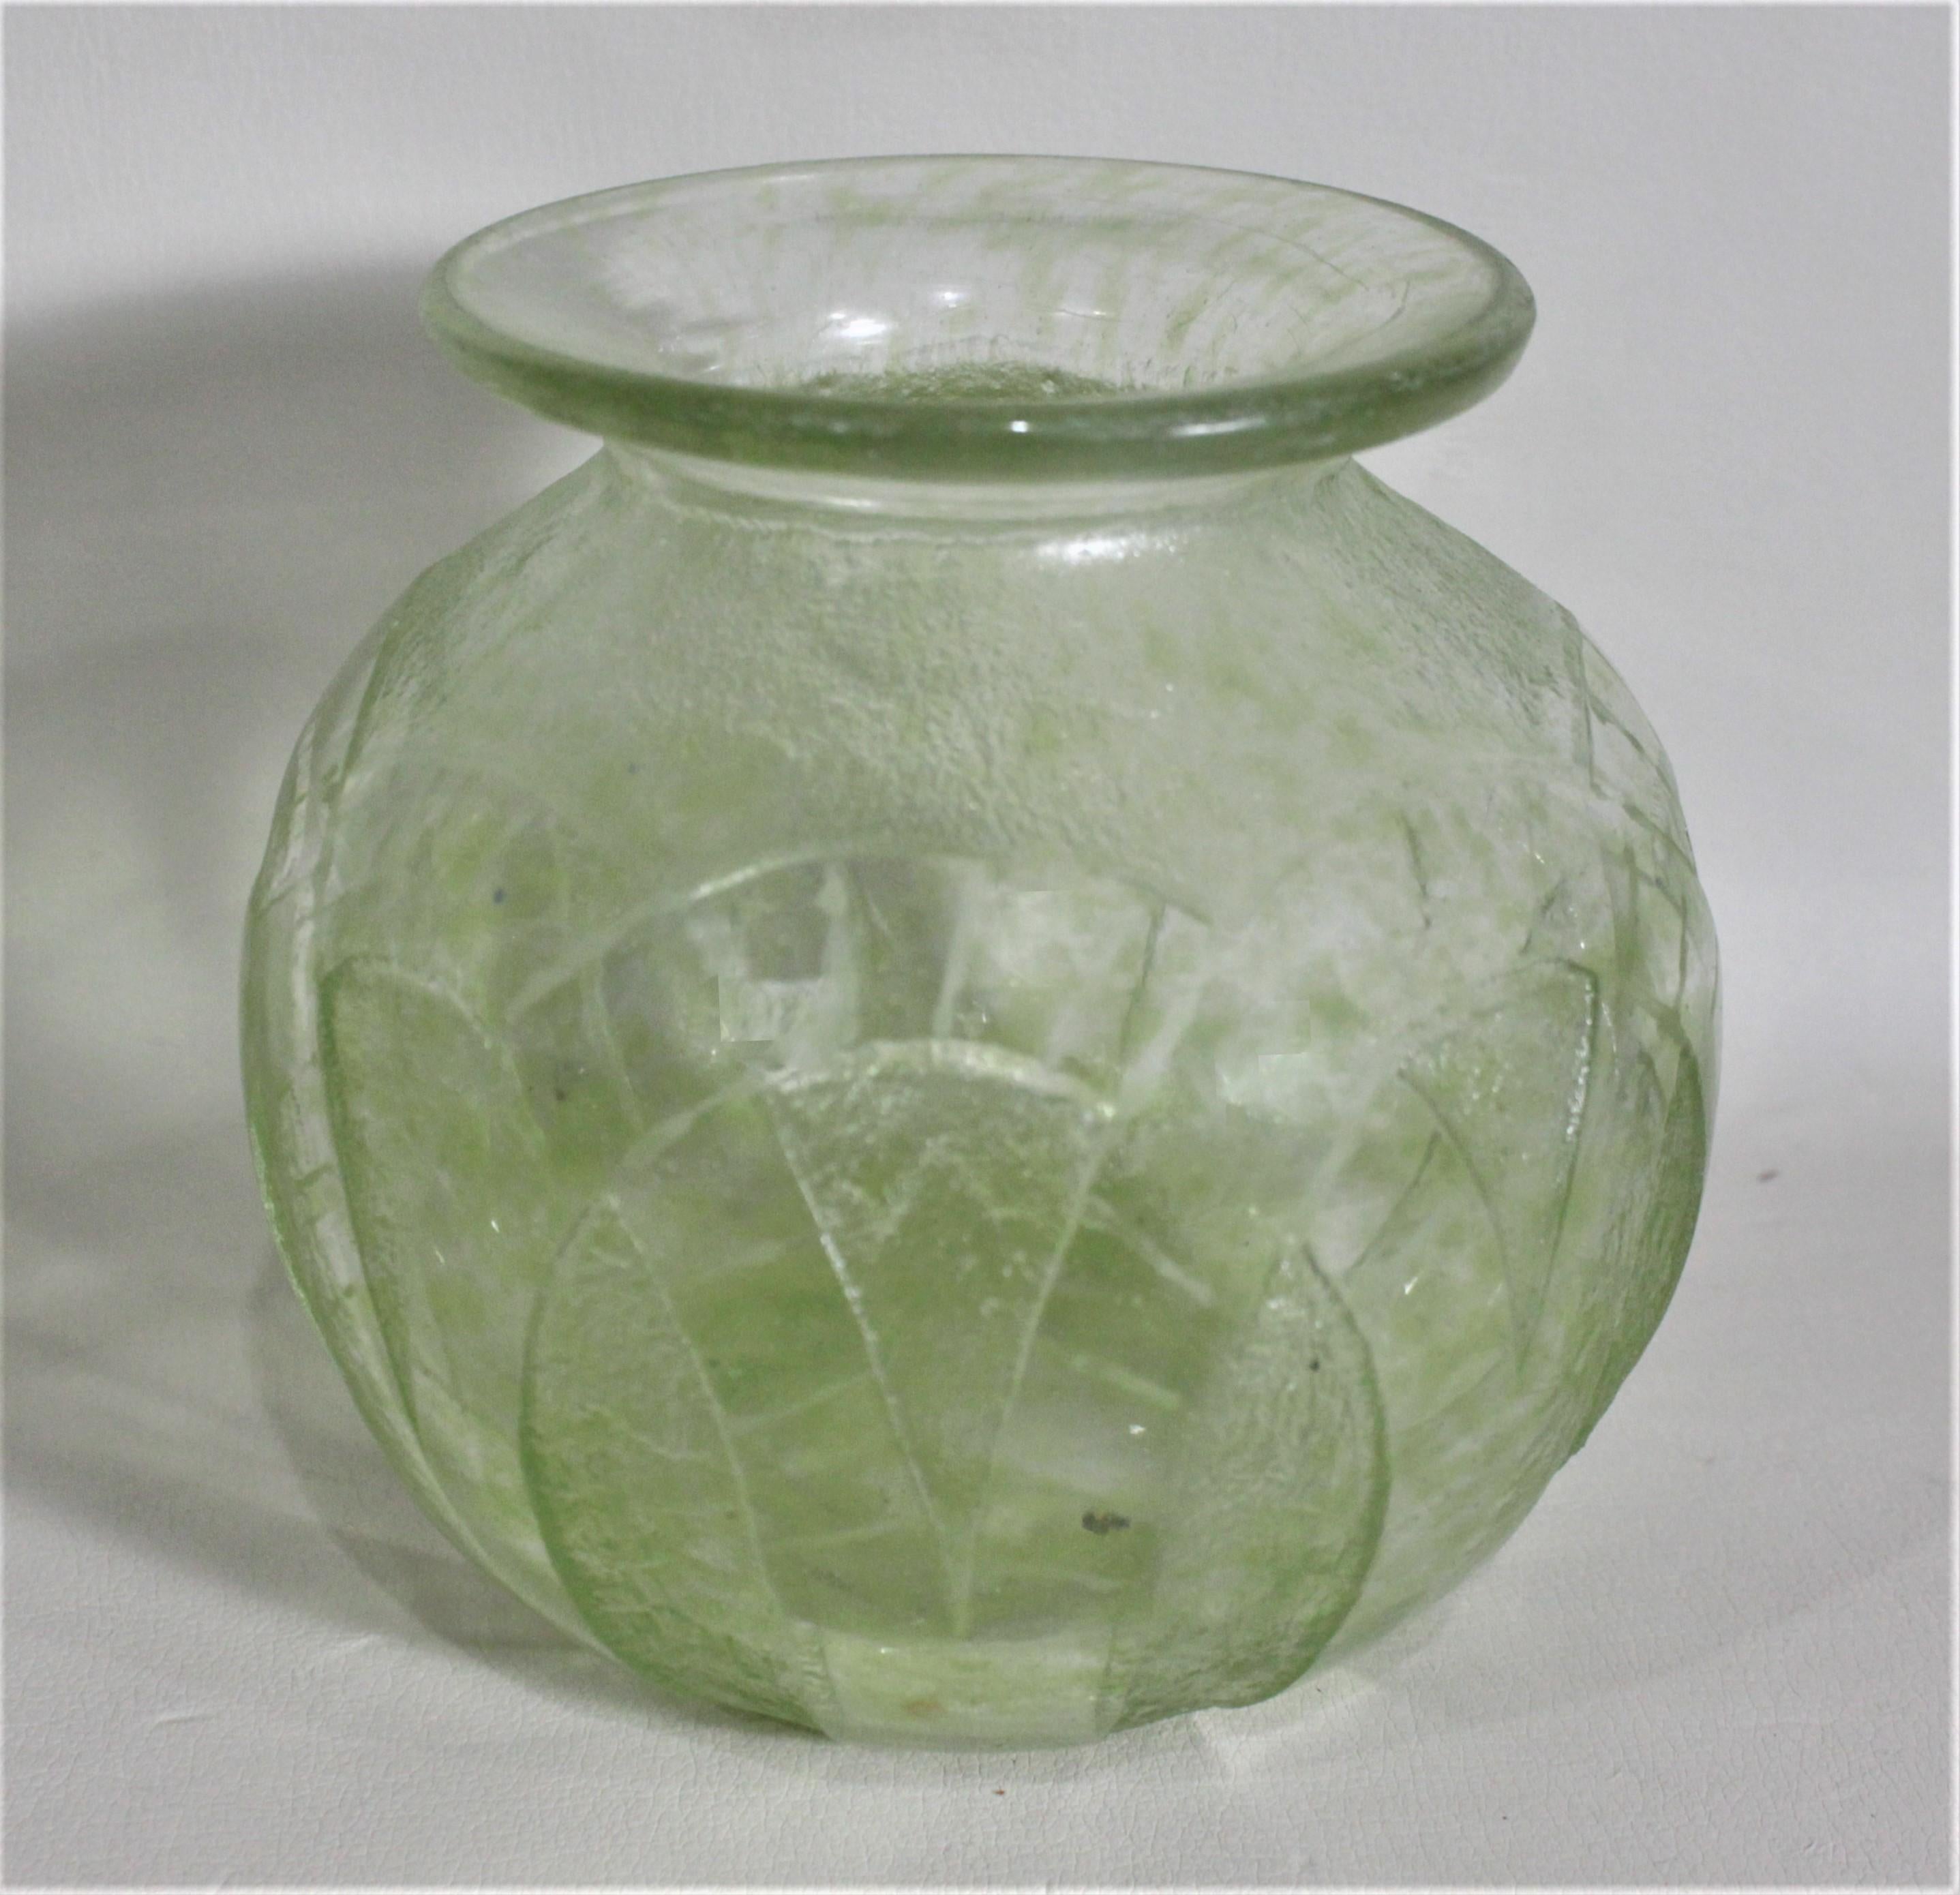 This Art Deco tinted green and acid etched vase was made in presumably France in circa 1920. The sides of this squat bulbous shaped vase have an inverted diamond pattern deeply etched into it with a textured exterior finish. The glass chosen has